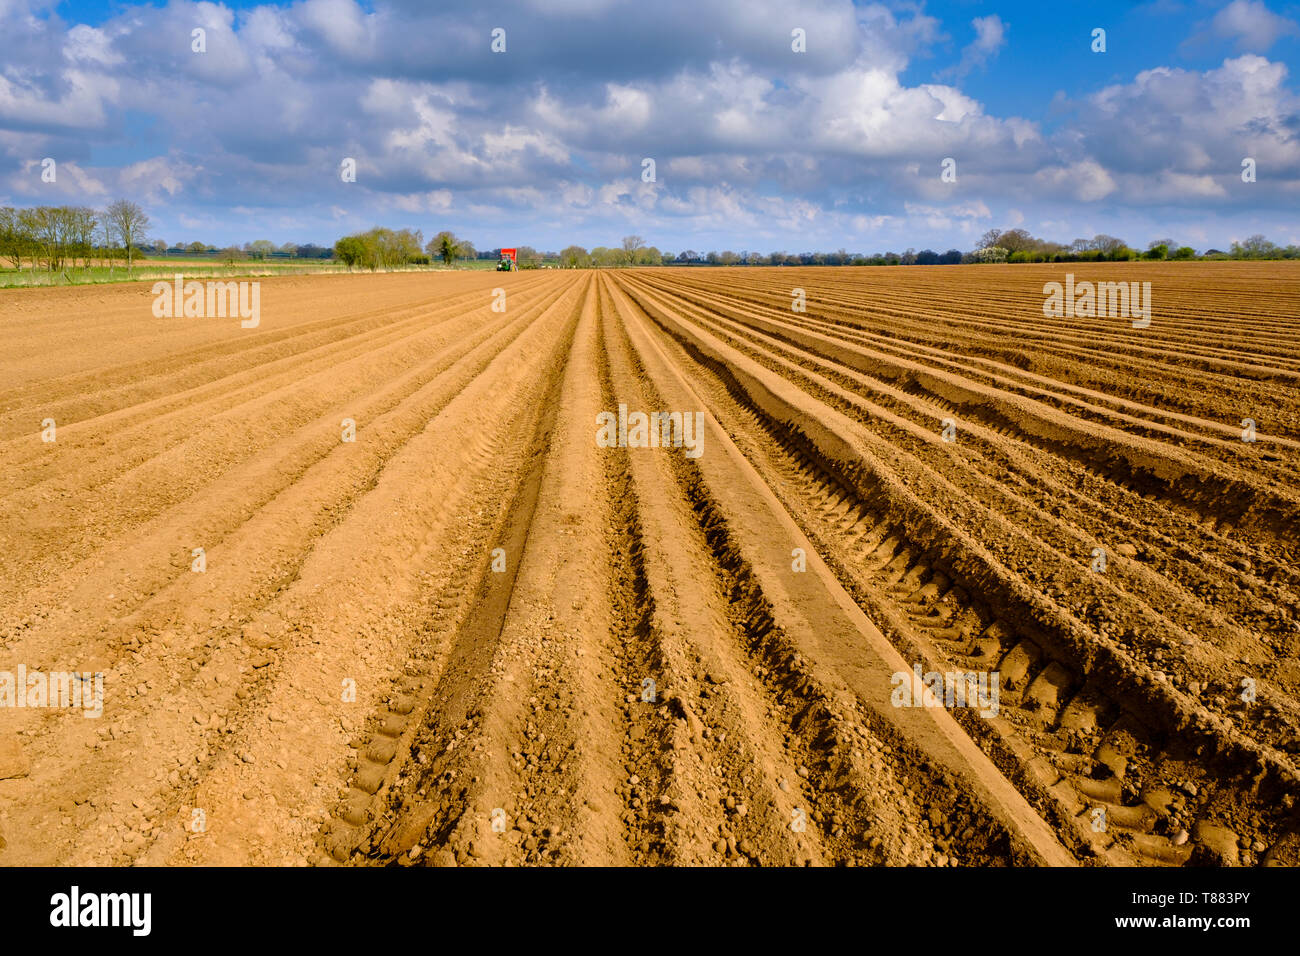 Neat furrows left in a field after potato planting. Stock Photo